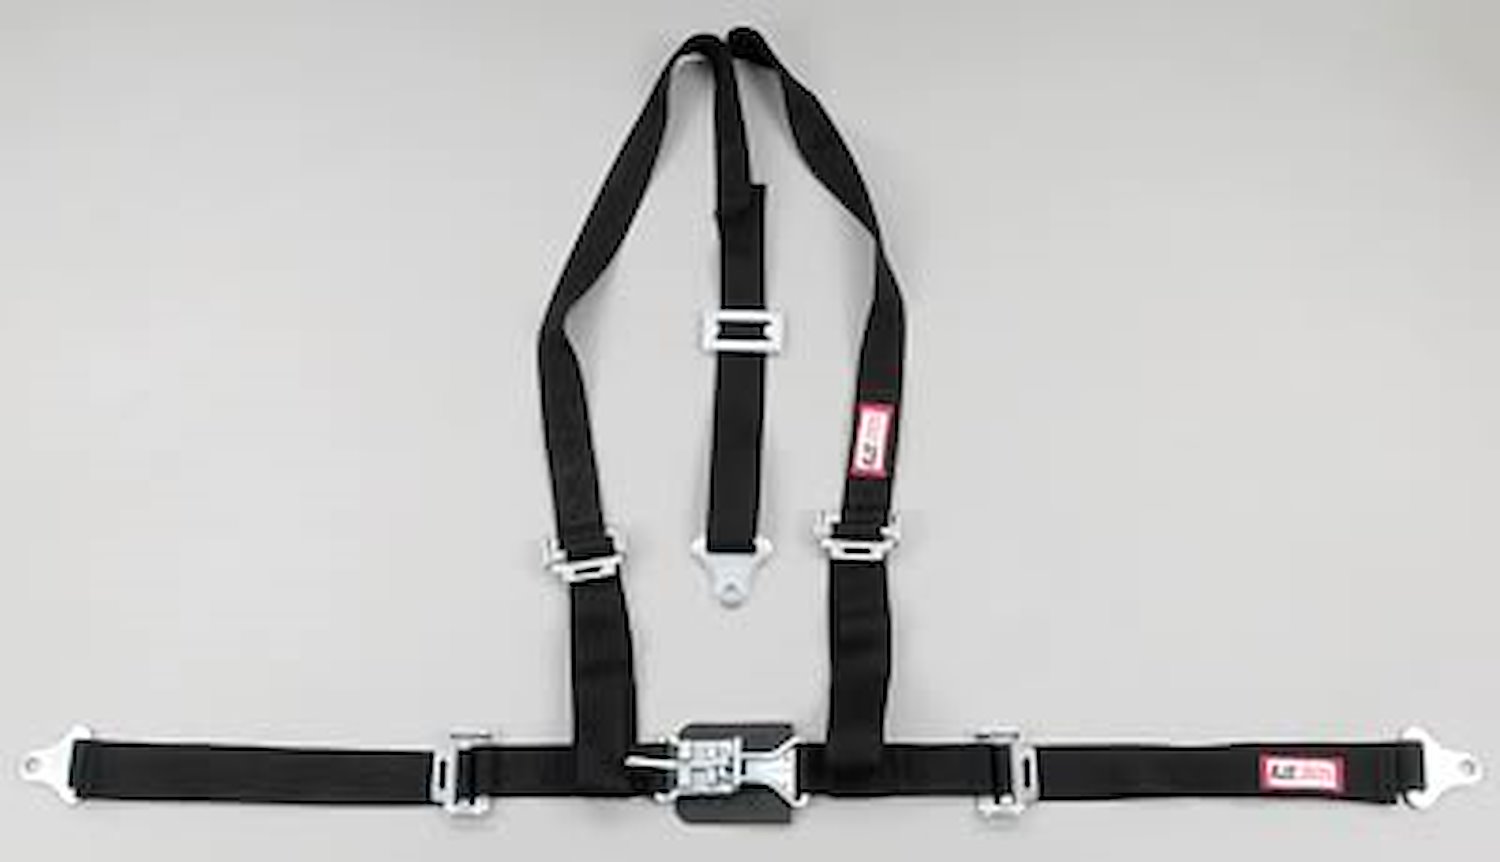 NON-SFI L&L HARNESS 2 PULL UP Lap Belt SNAP SEWN IN 2 S.H. INDIVIDUAL FLOOR Mount w/STERNUM STRAP WRAP/BOLT BLACK